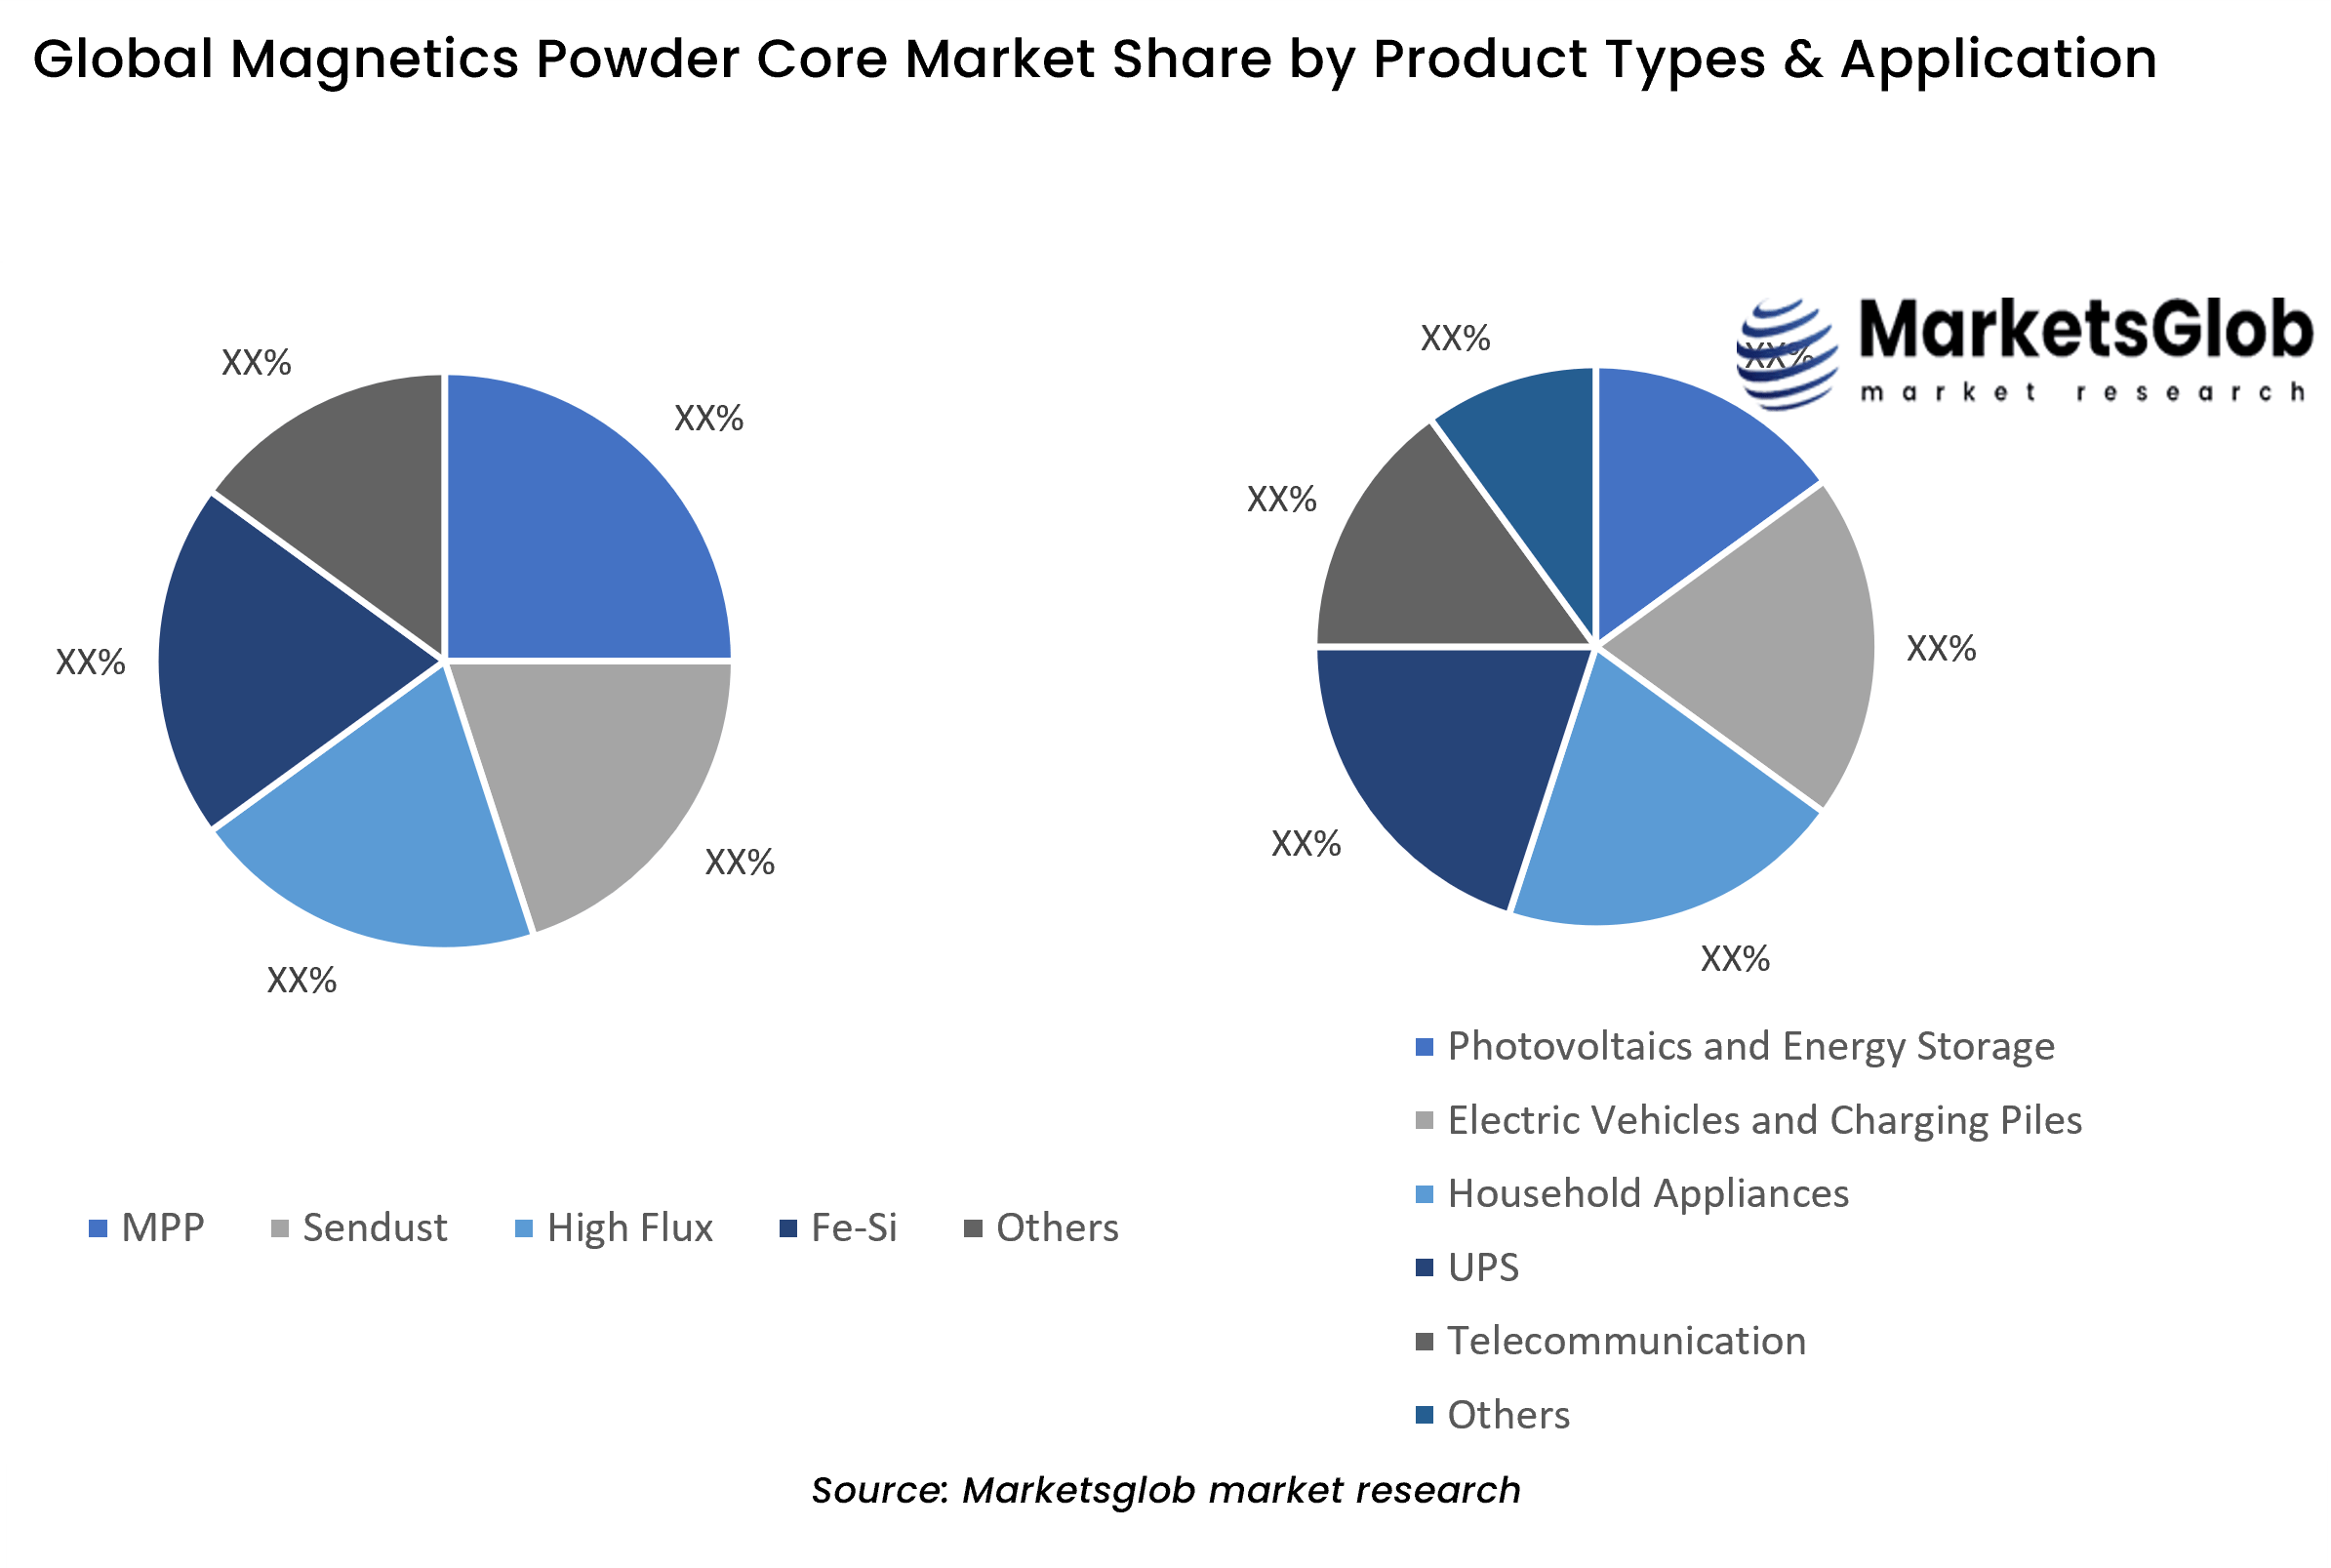 Magnetics Powder Core Share by Product Types & Application